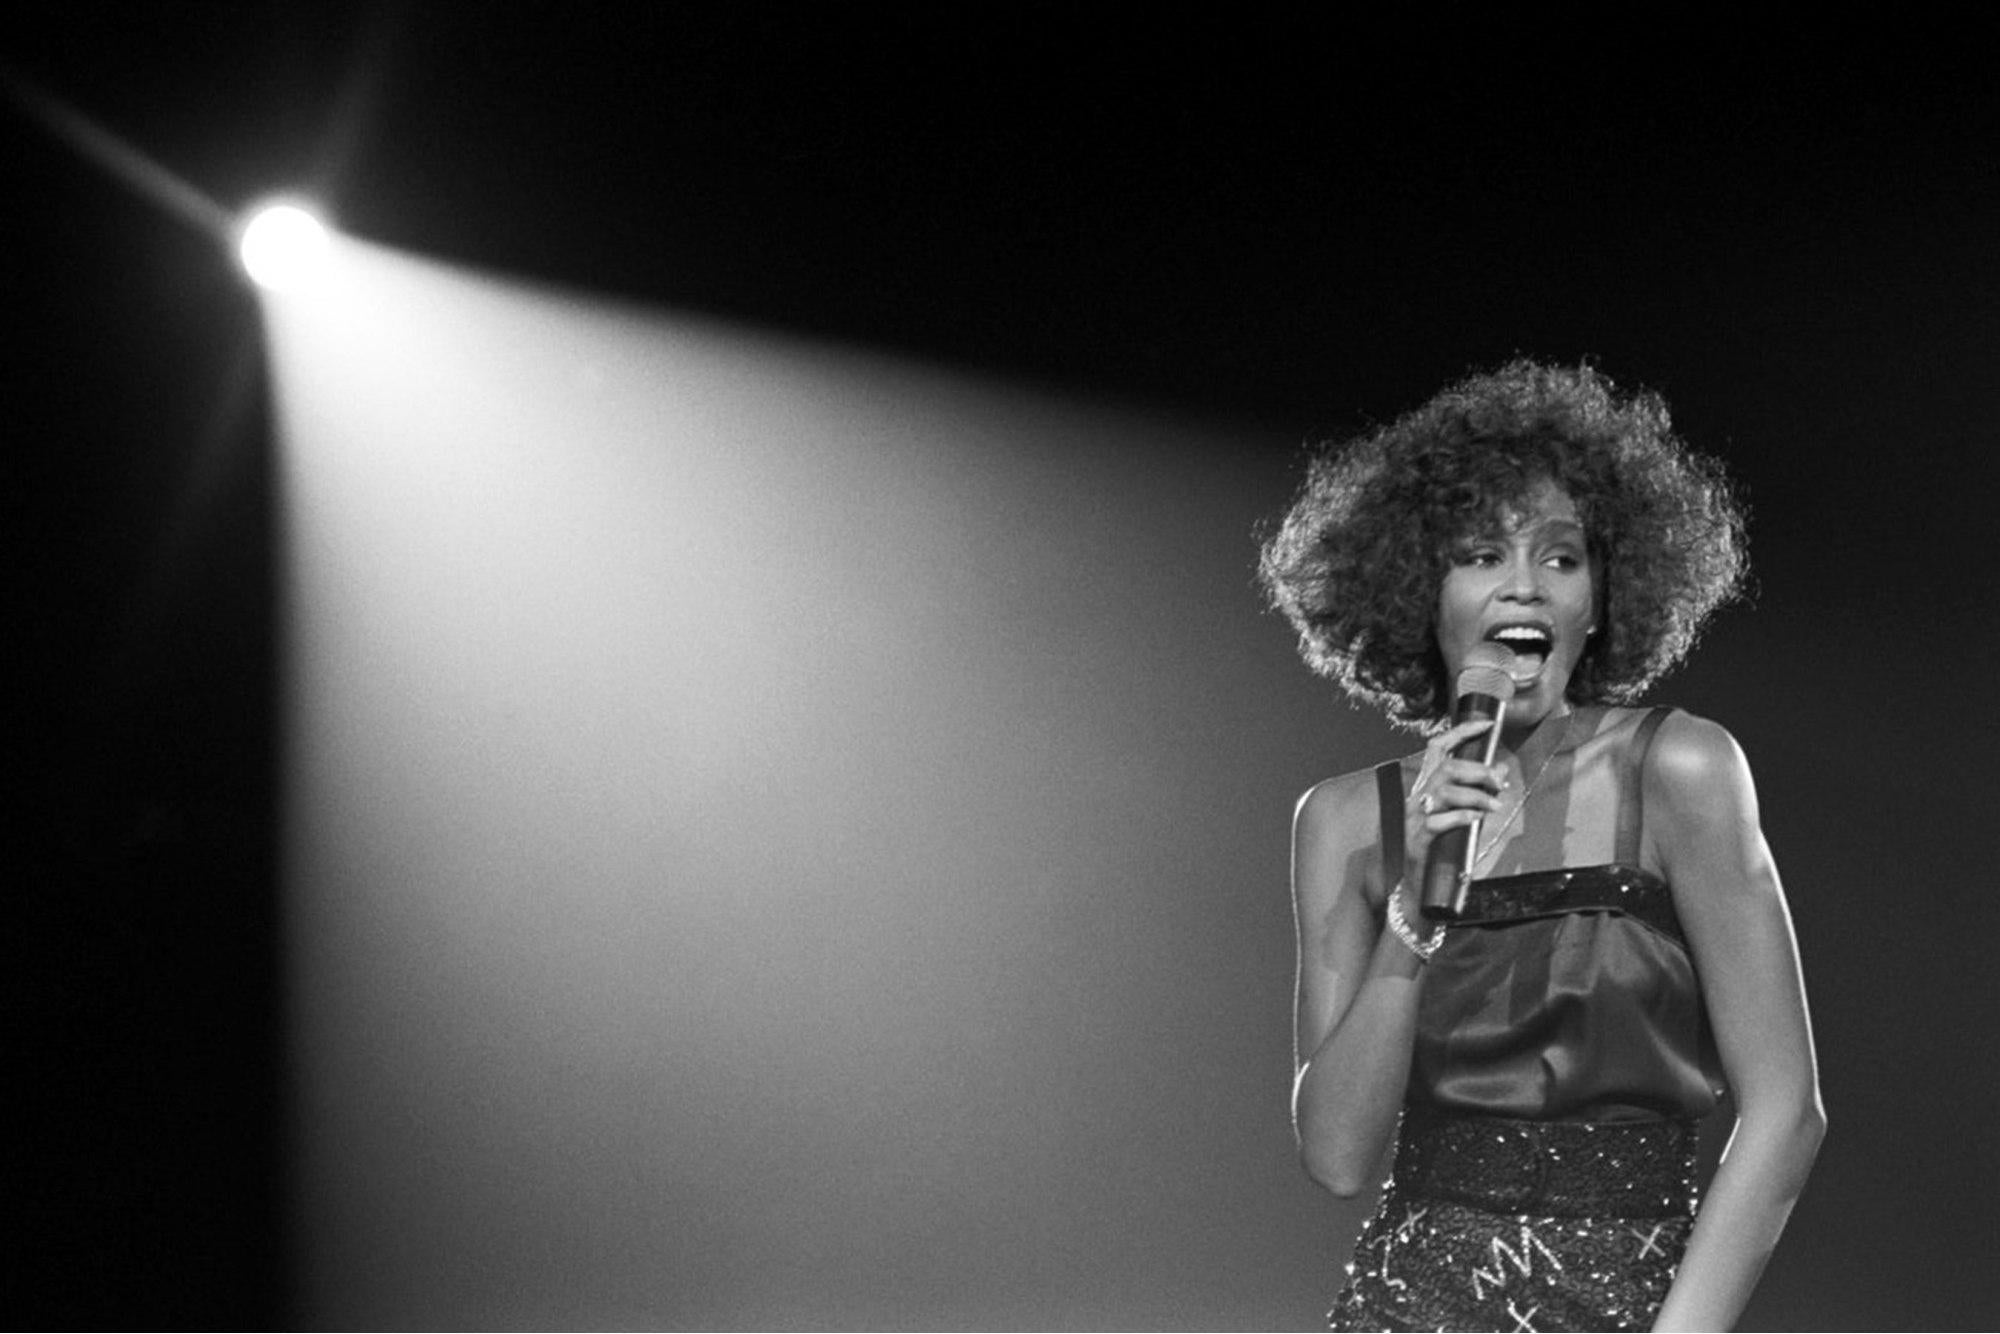 Nick Broomfield's new documentary 'Whitney: Can I Be Me' explores the late singer's life